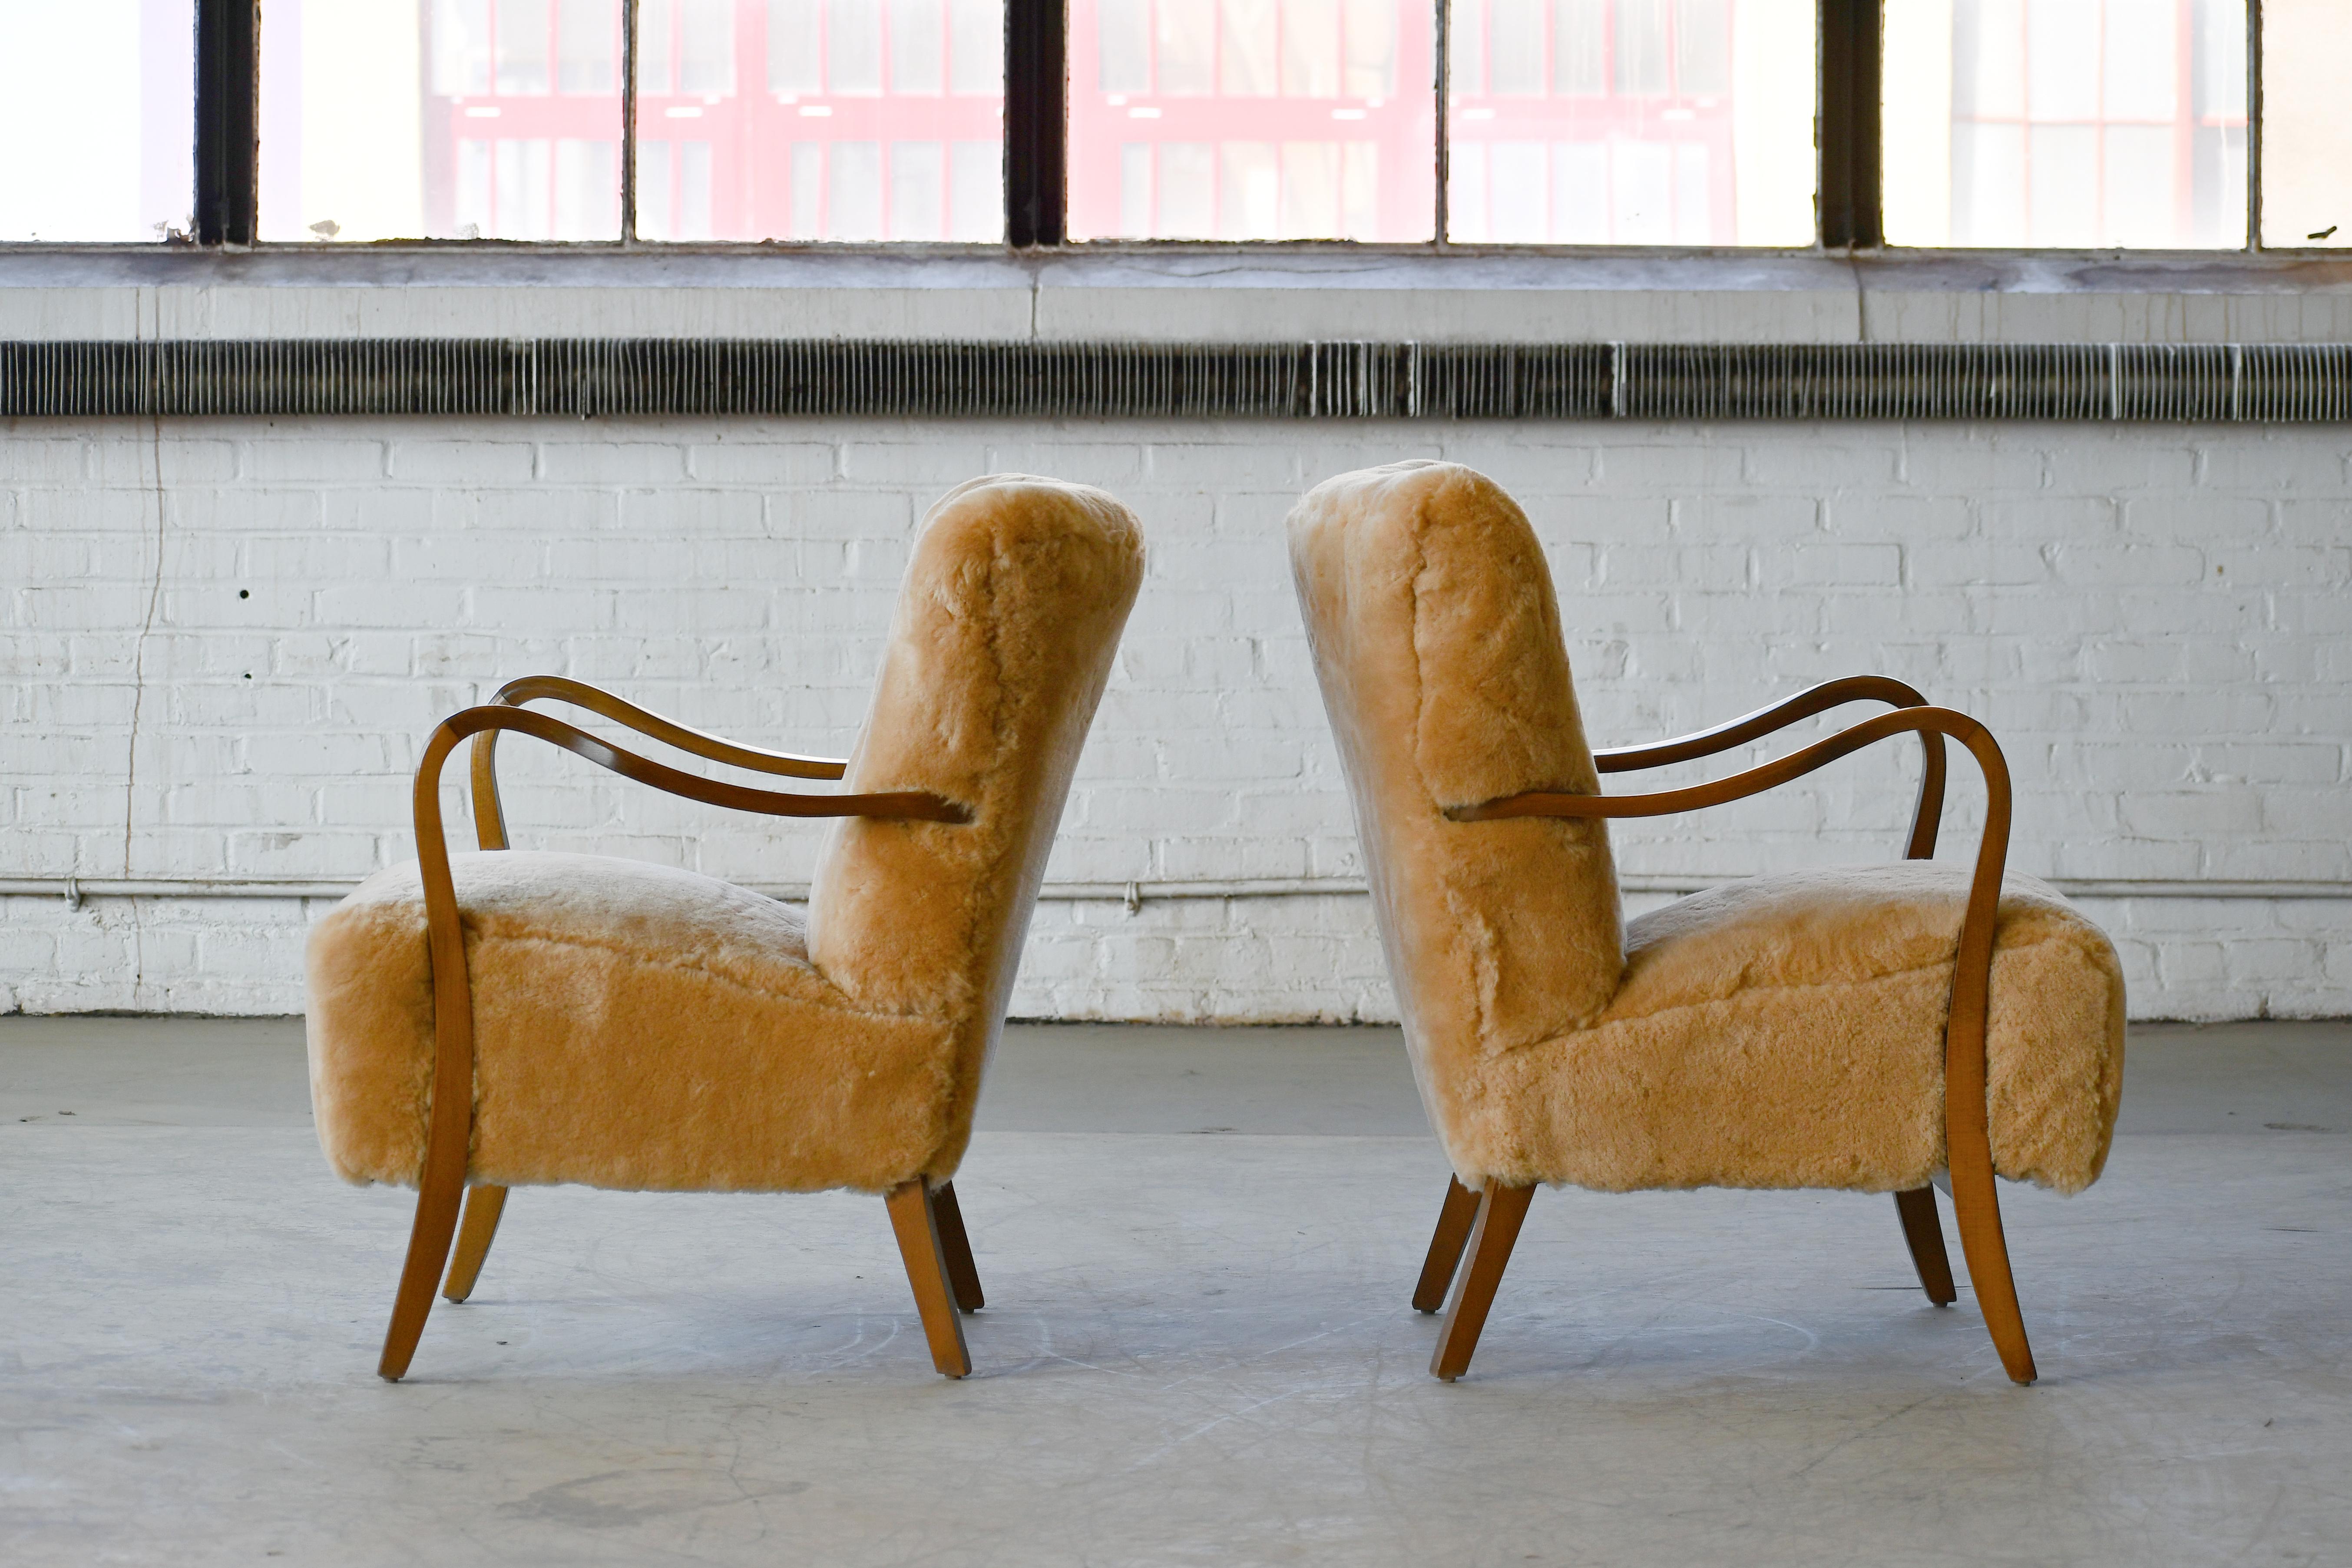 Sheepskin Pair of Danish 1940s Low Back Easy Chairs in Amber Shearling with Open Armrests